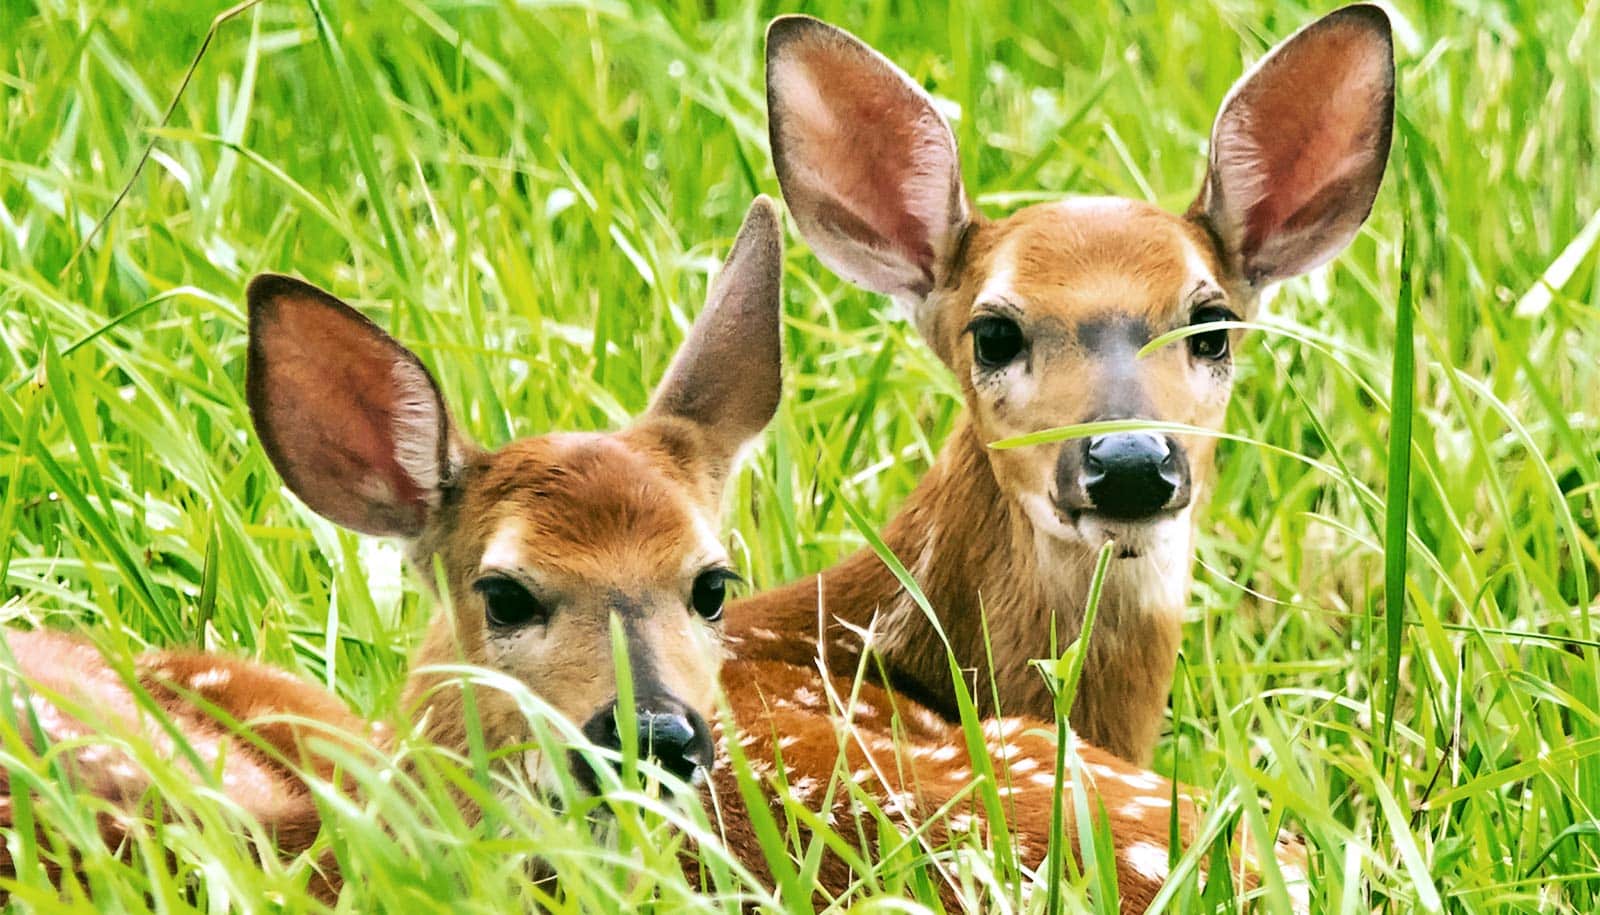 People ratchet up feelings of burnout in stressed out fawns - Futurity